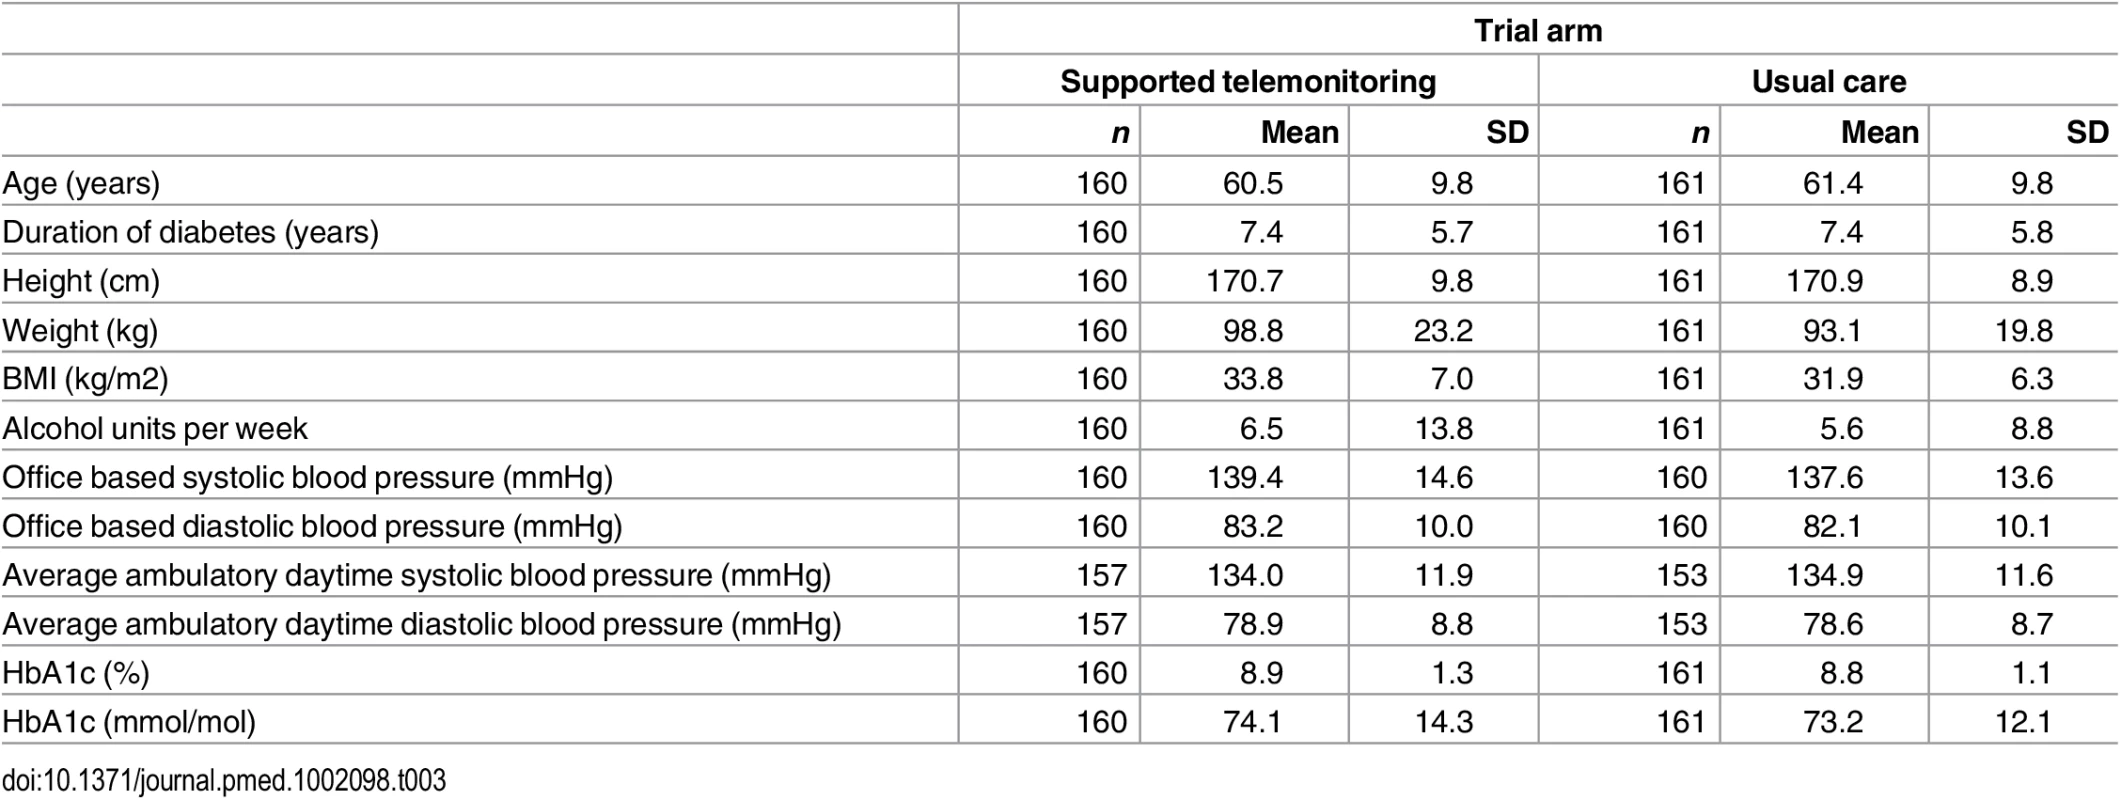 Characteristics of all trial participants at baseline by trial arm (supported telemonitoring compared to usual care).